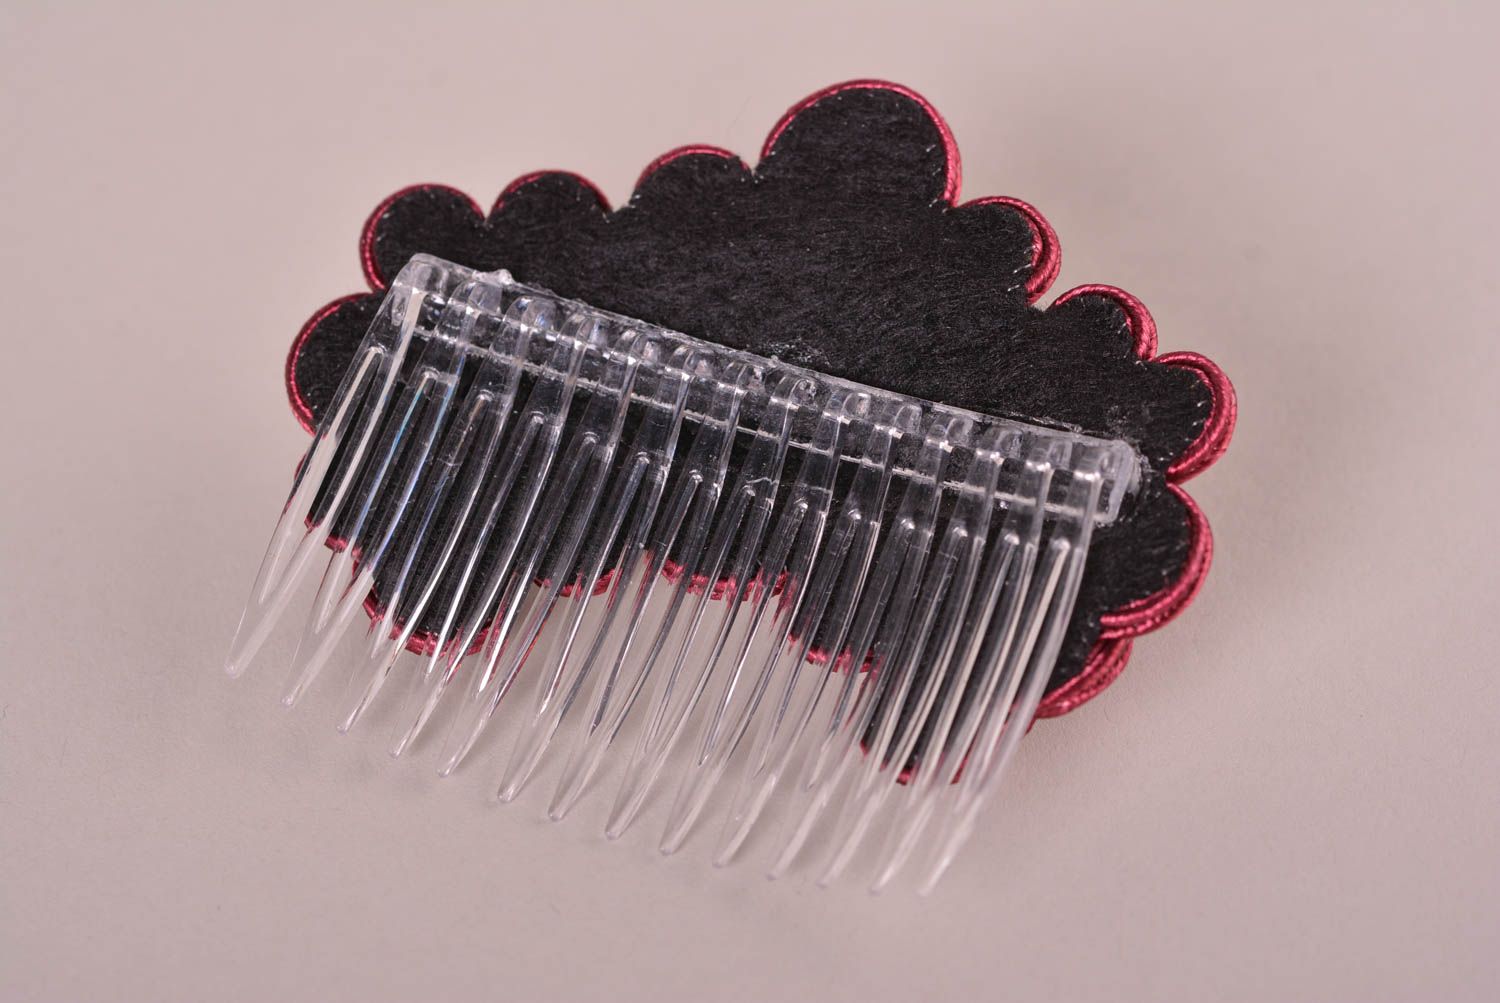 Handmade hair comb designer hair accessories hair jewelry best gifts for girls photo 5